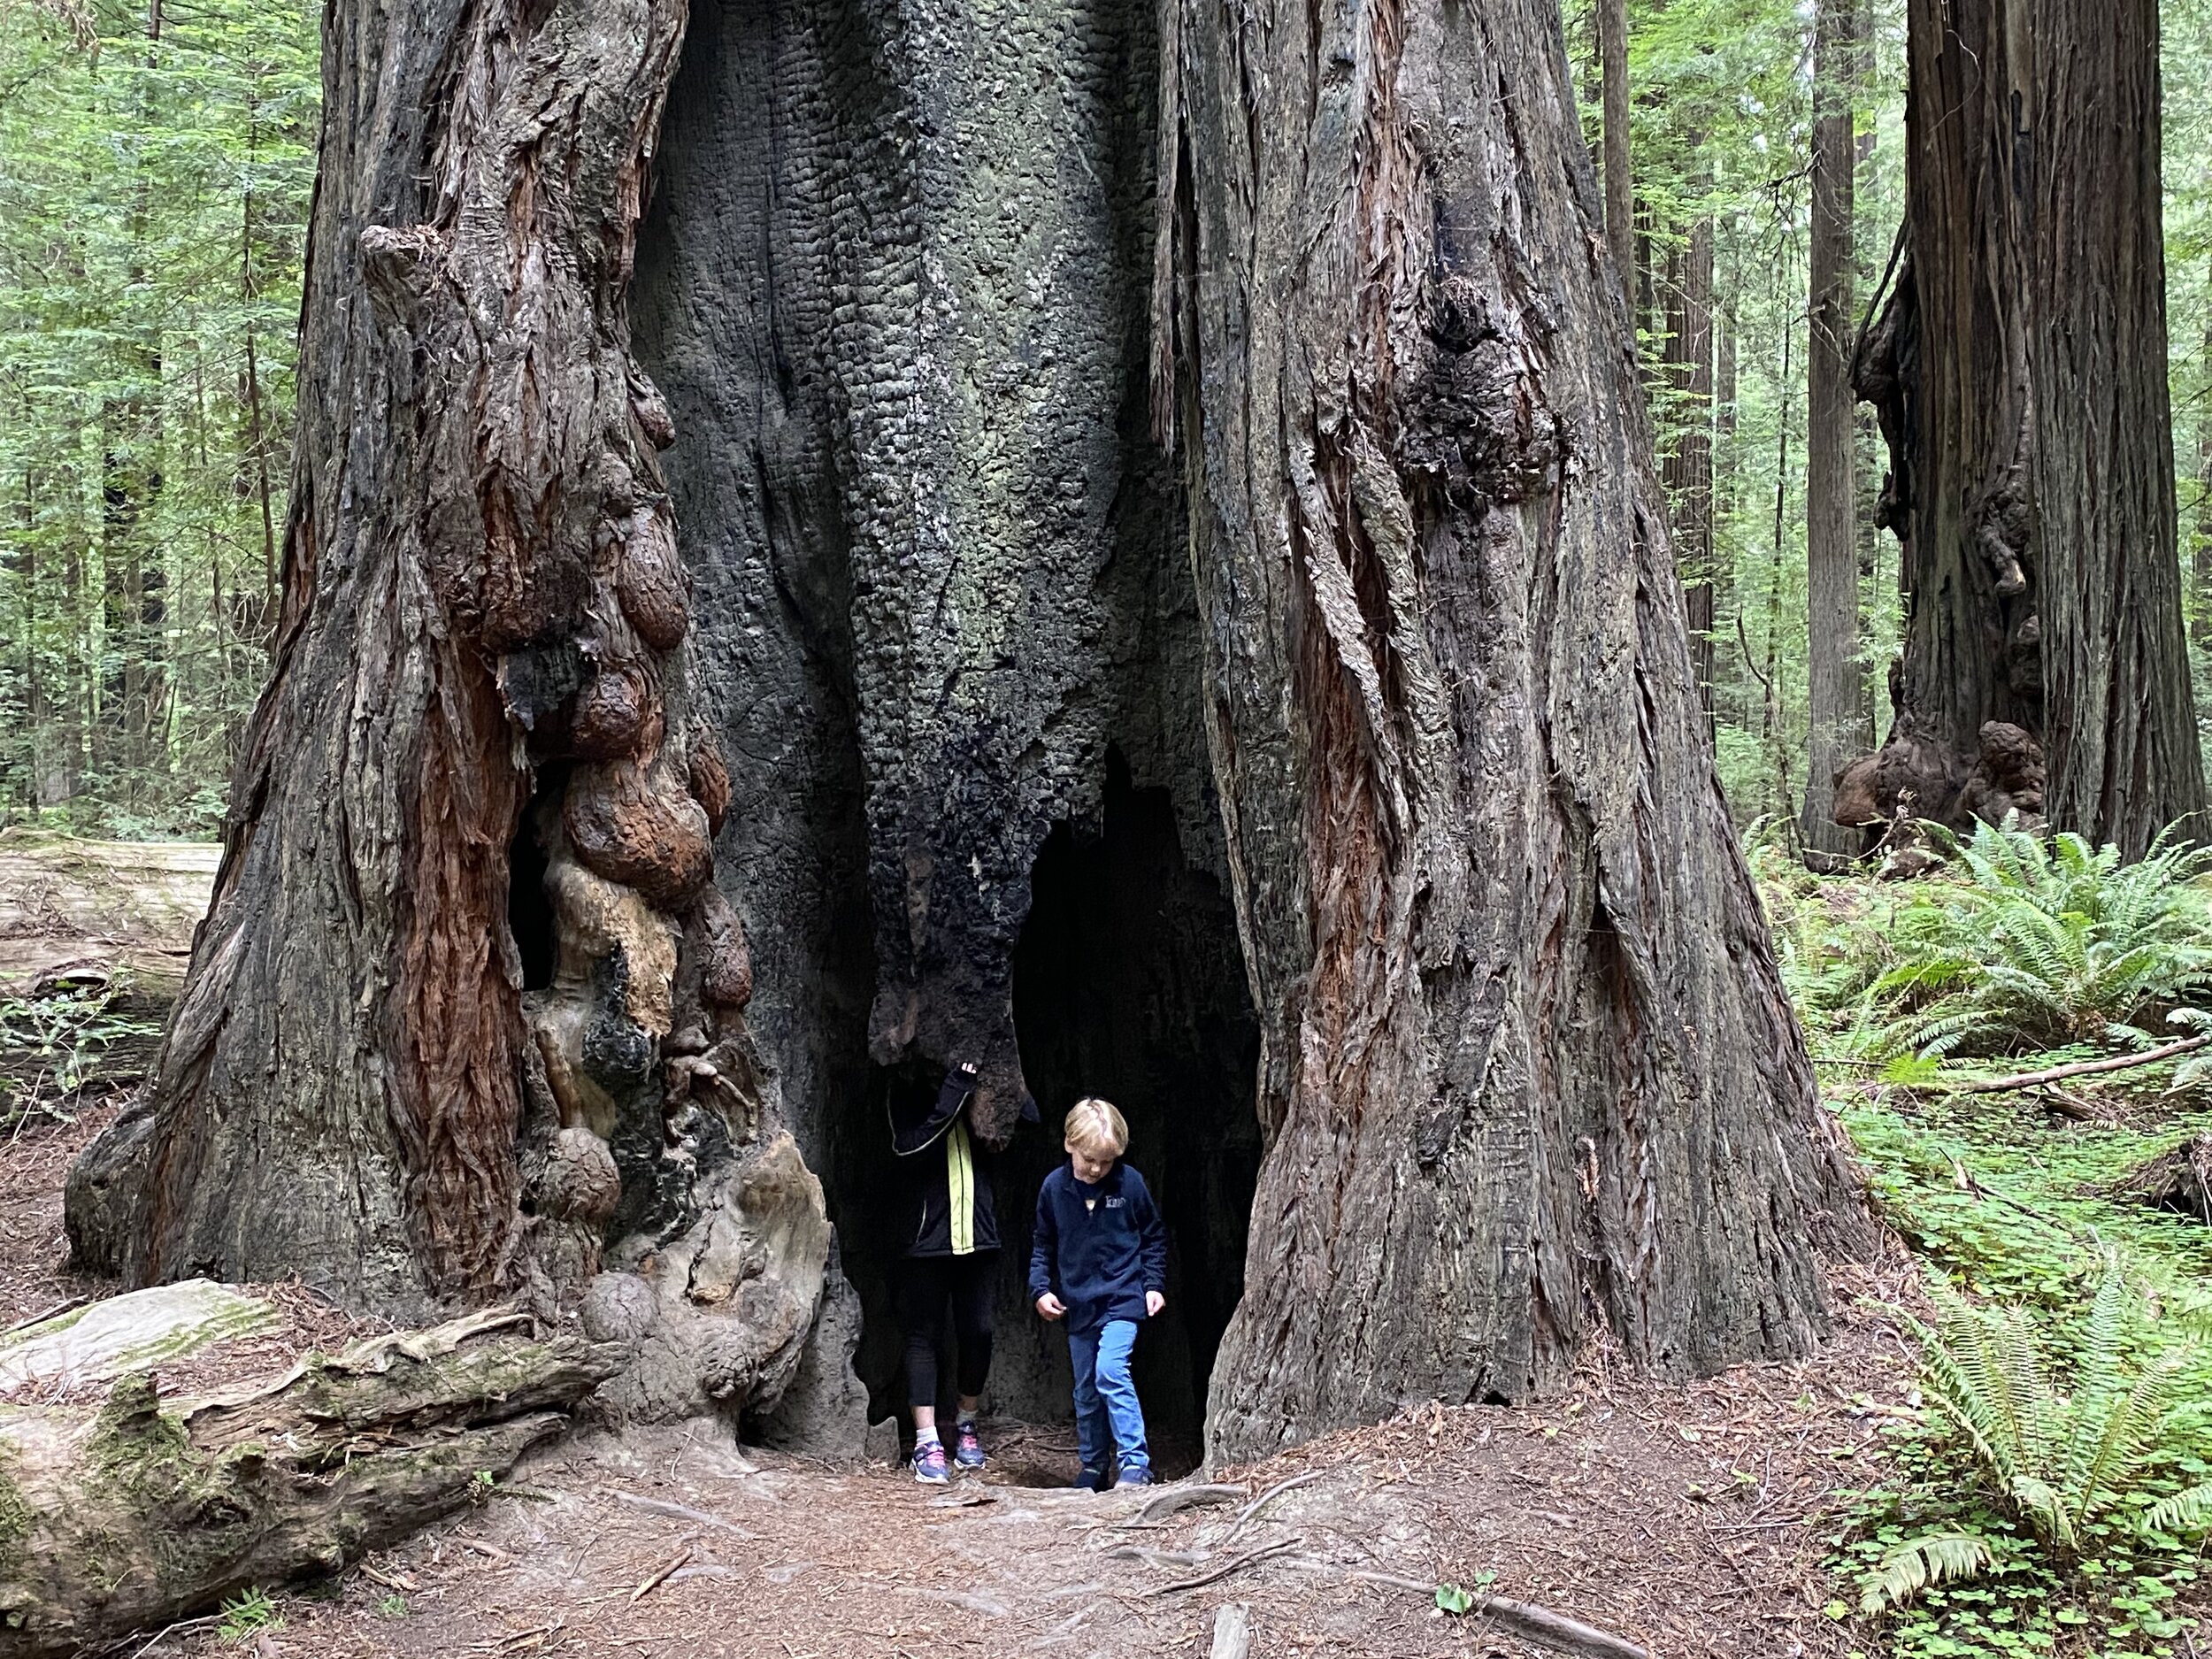 We found numerous places we could “shelter” if we got lost in a Redwoods forest! Photo by Karen Boudreaux, June 11, 2021